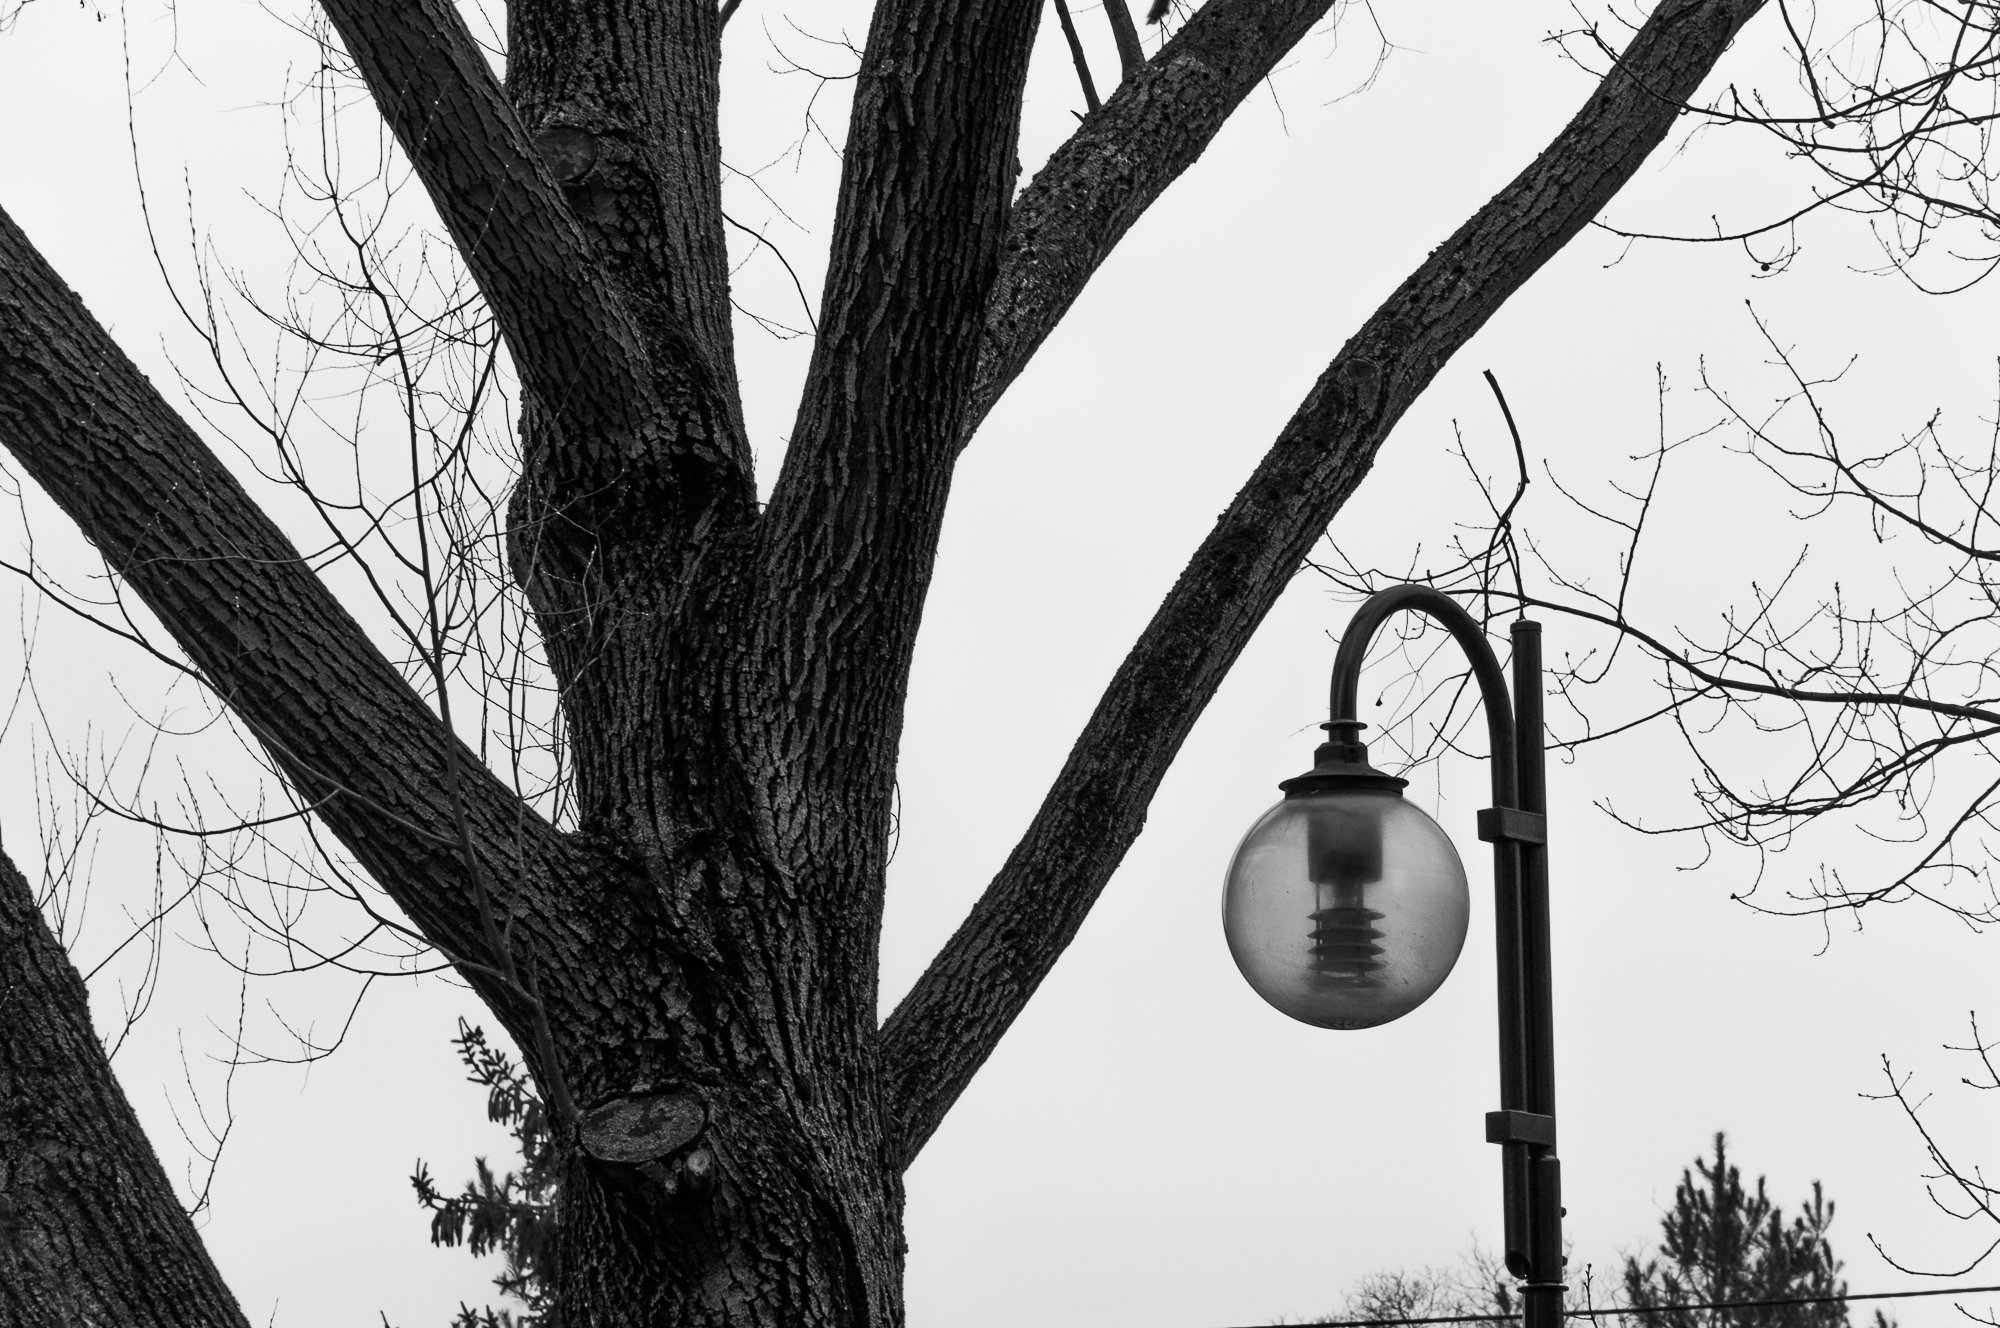 Adam Mazek Photography Warsaw 2021. Post: "Each subsequent day." Minimalism. Street lamp and tree.